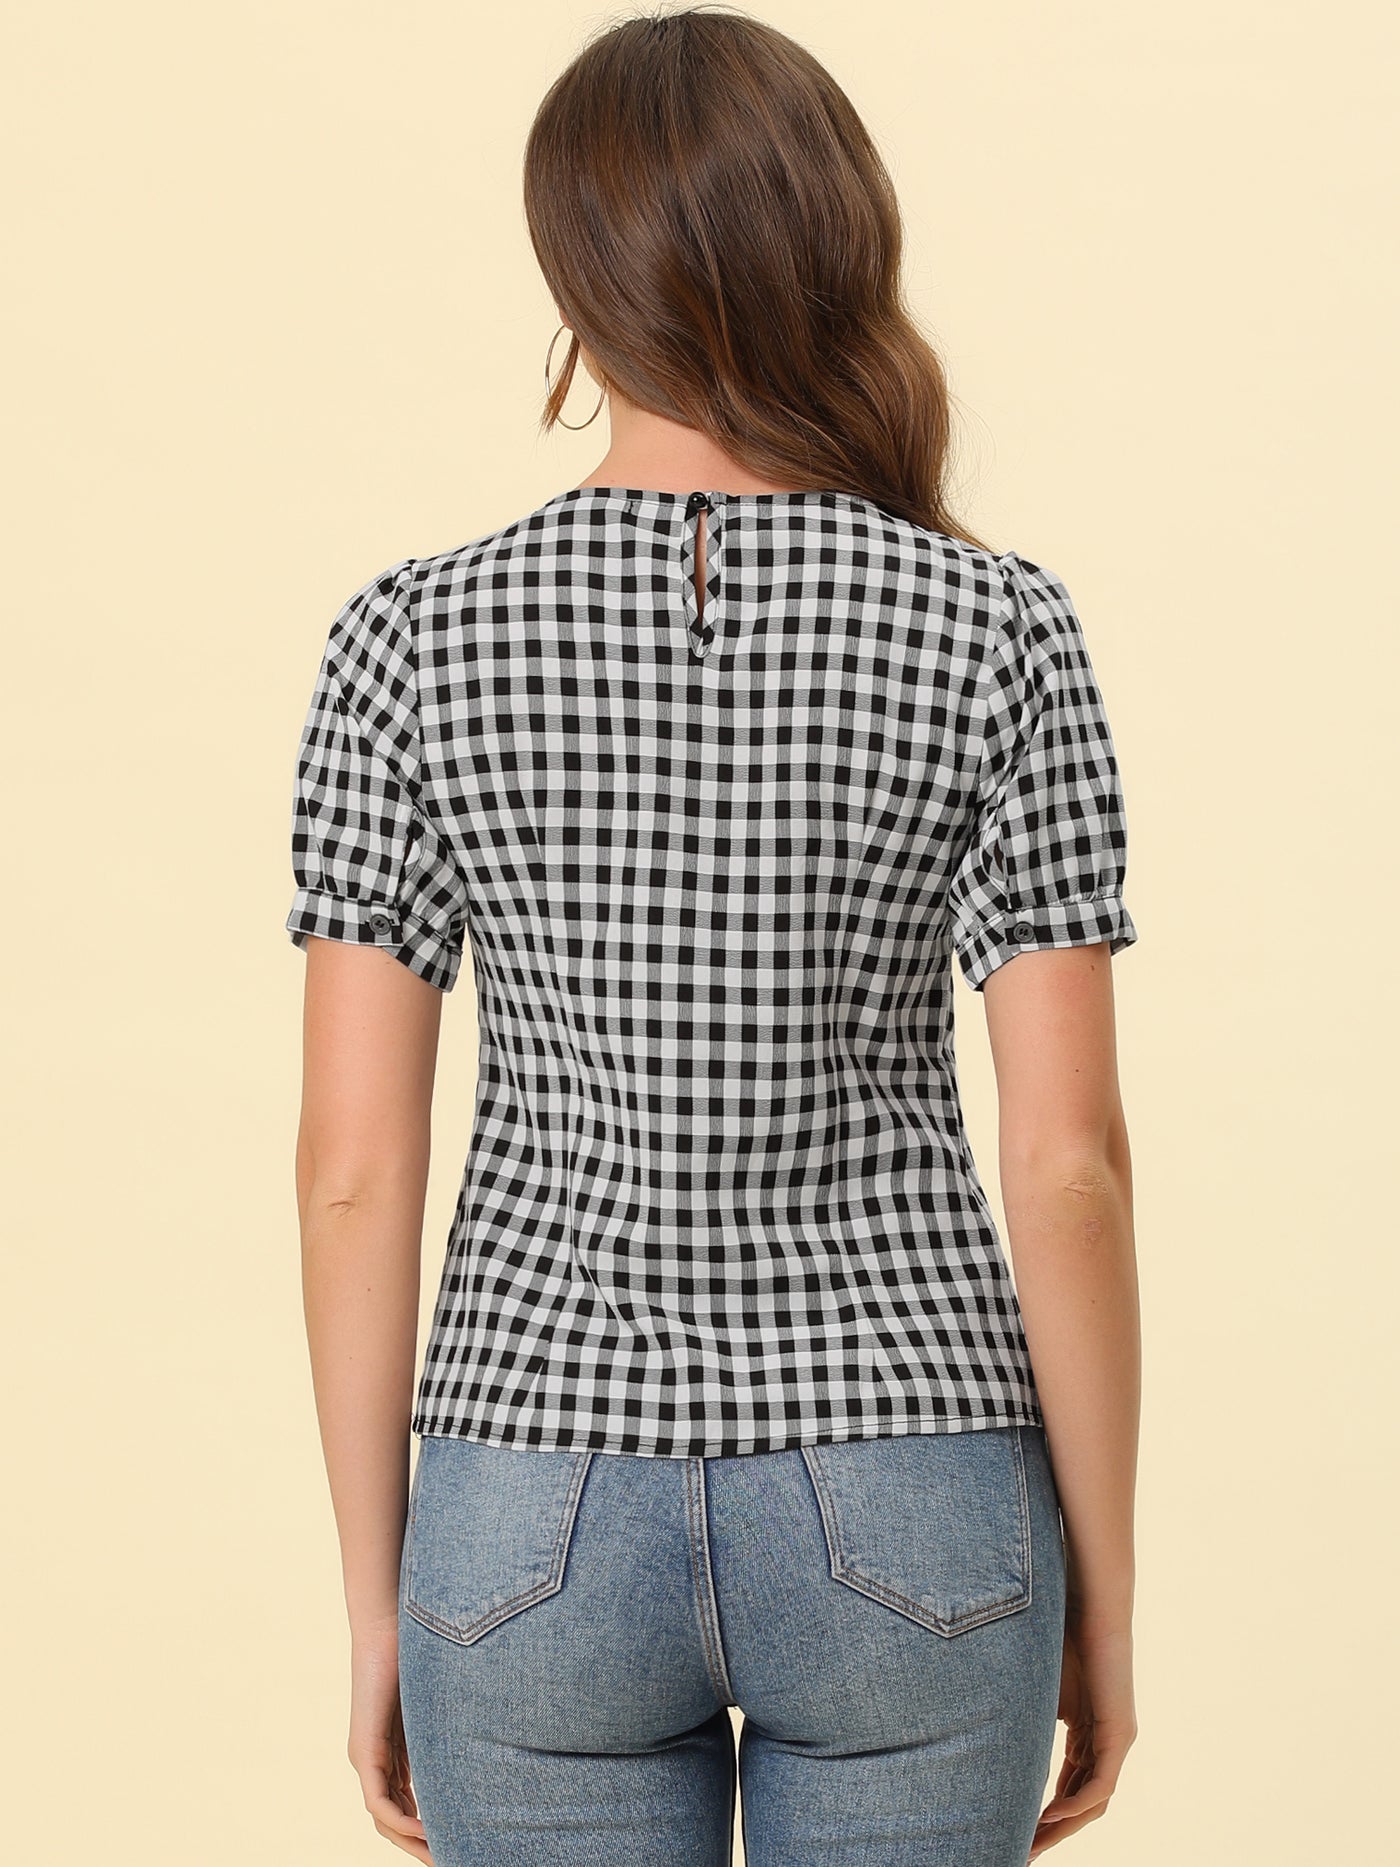 Allegra K Vintage Blouse for Plaid Crew Neck Puff Sleeve Casual Gingham Tops